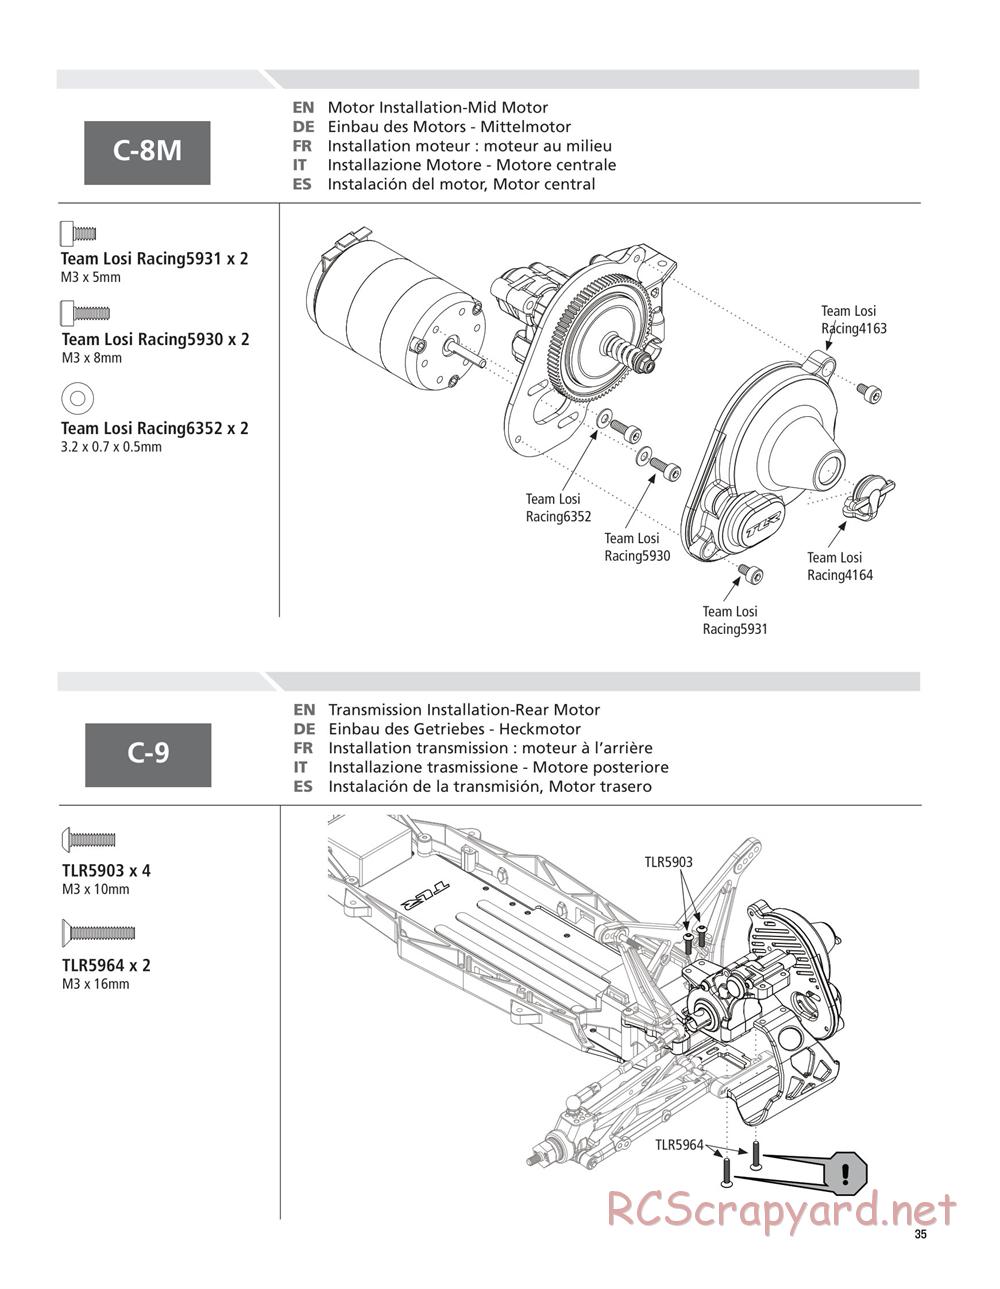 Team Losi - 22SCT - Manual - Page 35